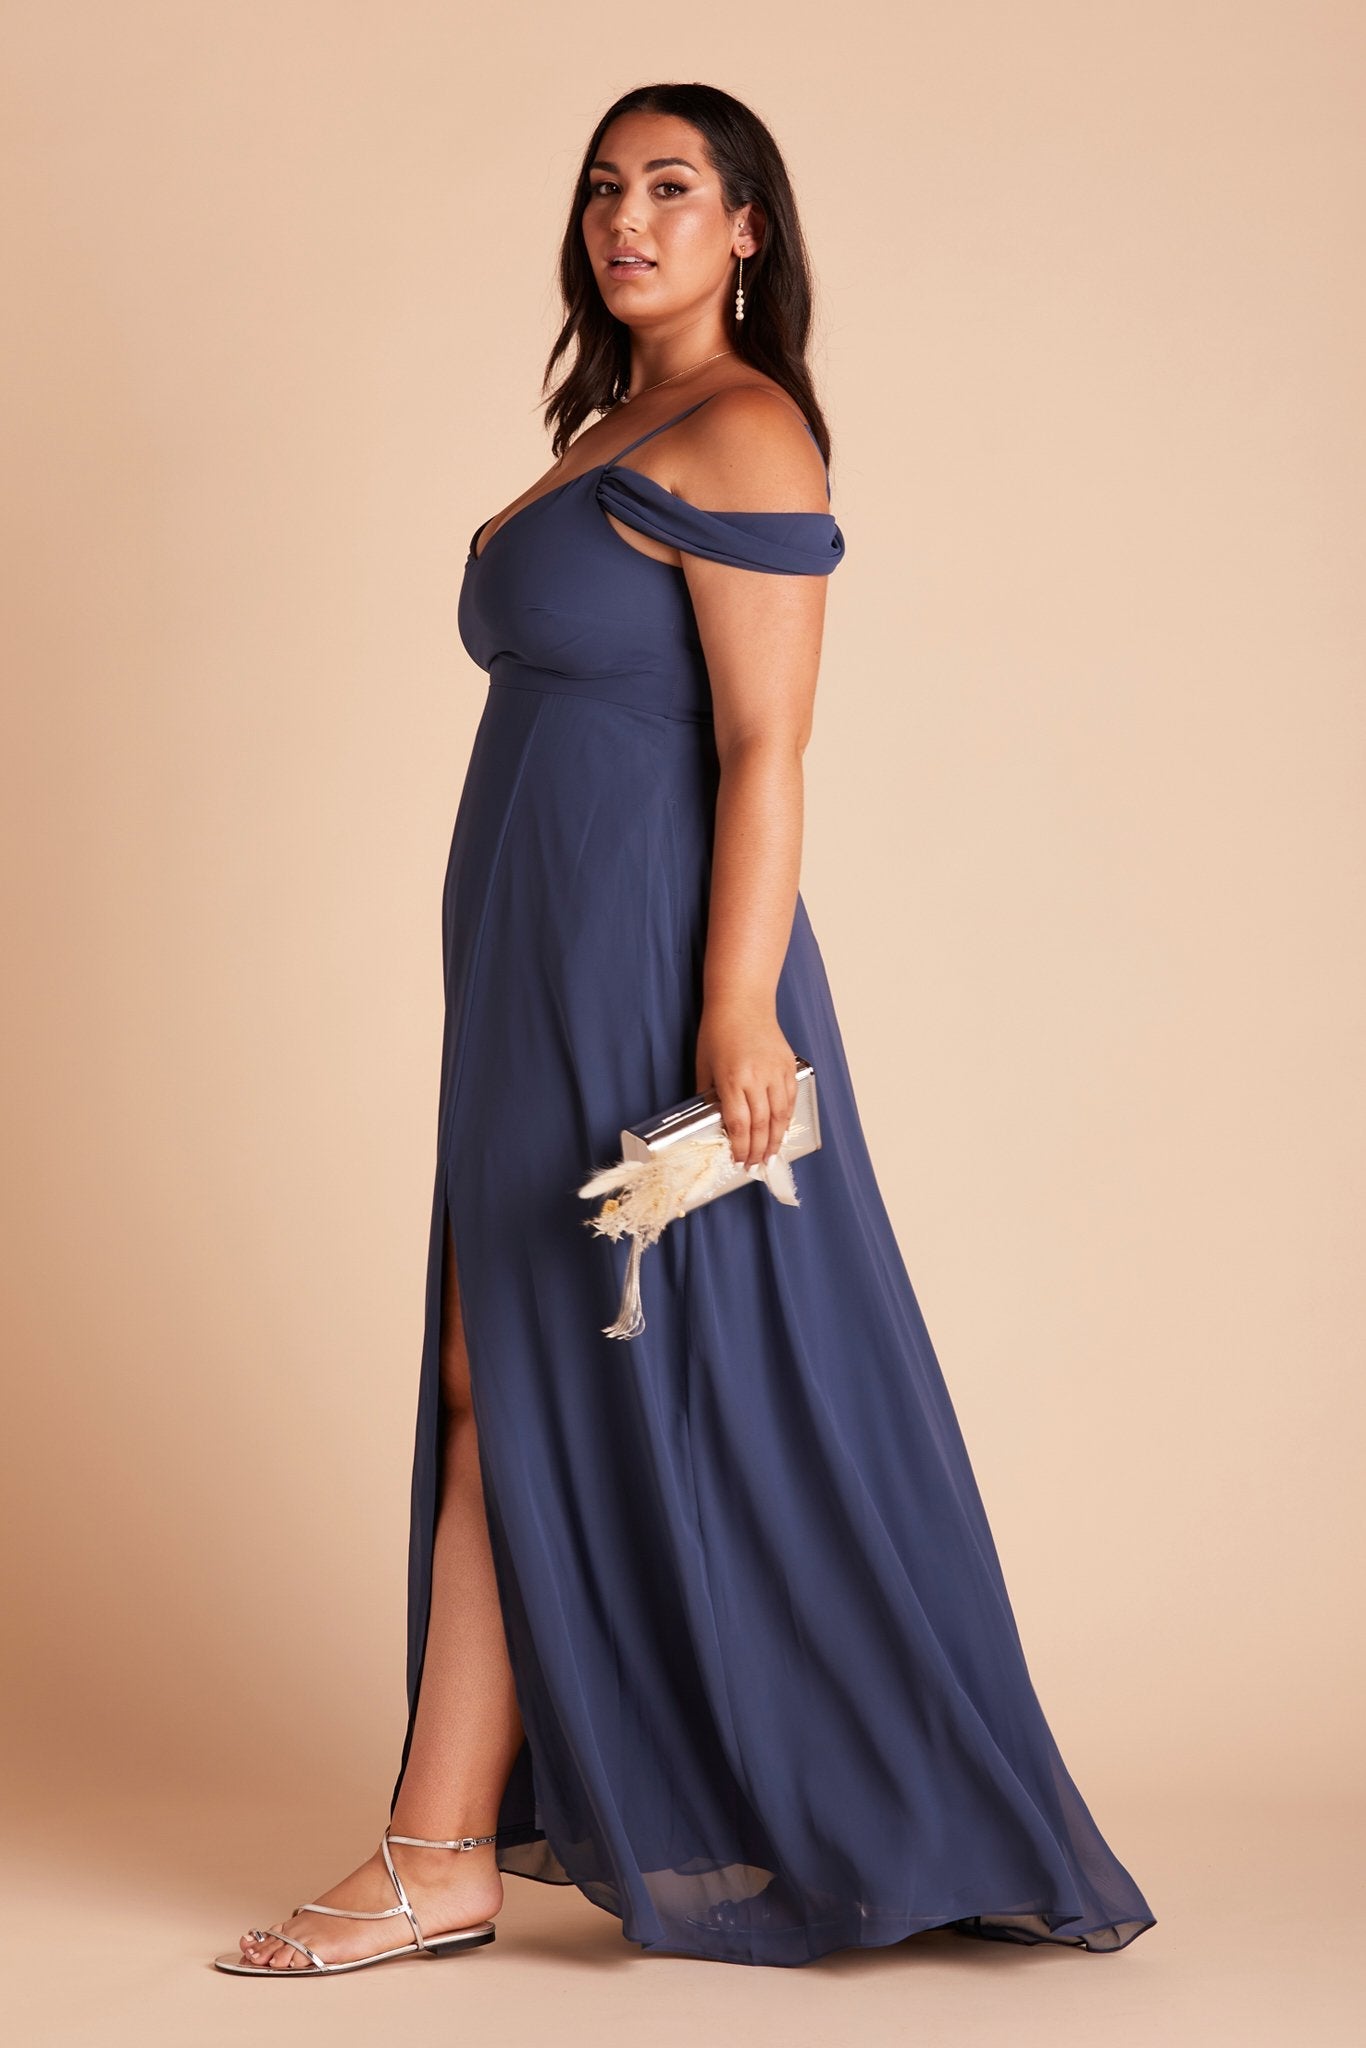 Devin convertible plus size bridesmaids dress with slit in slate blue chiffon by Birdy Grey, side view